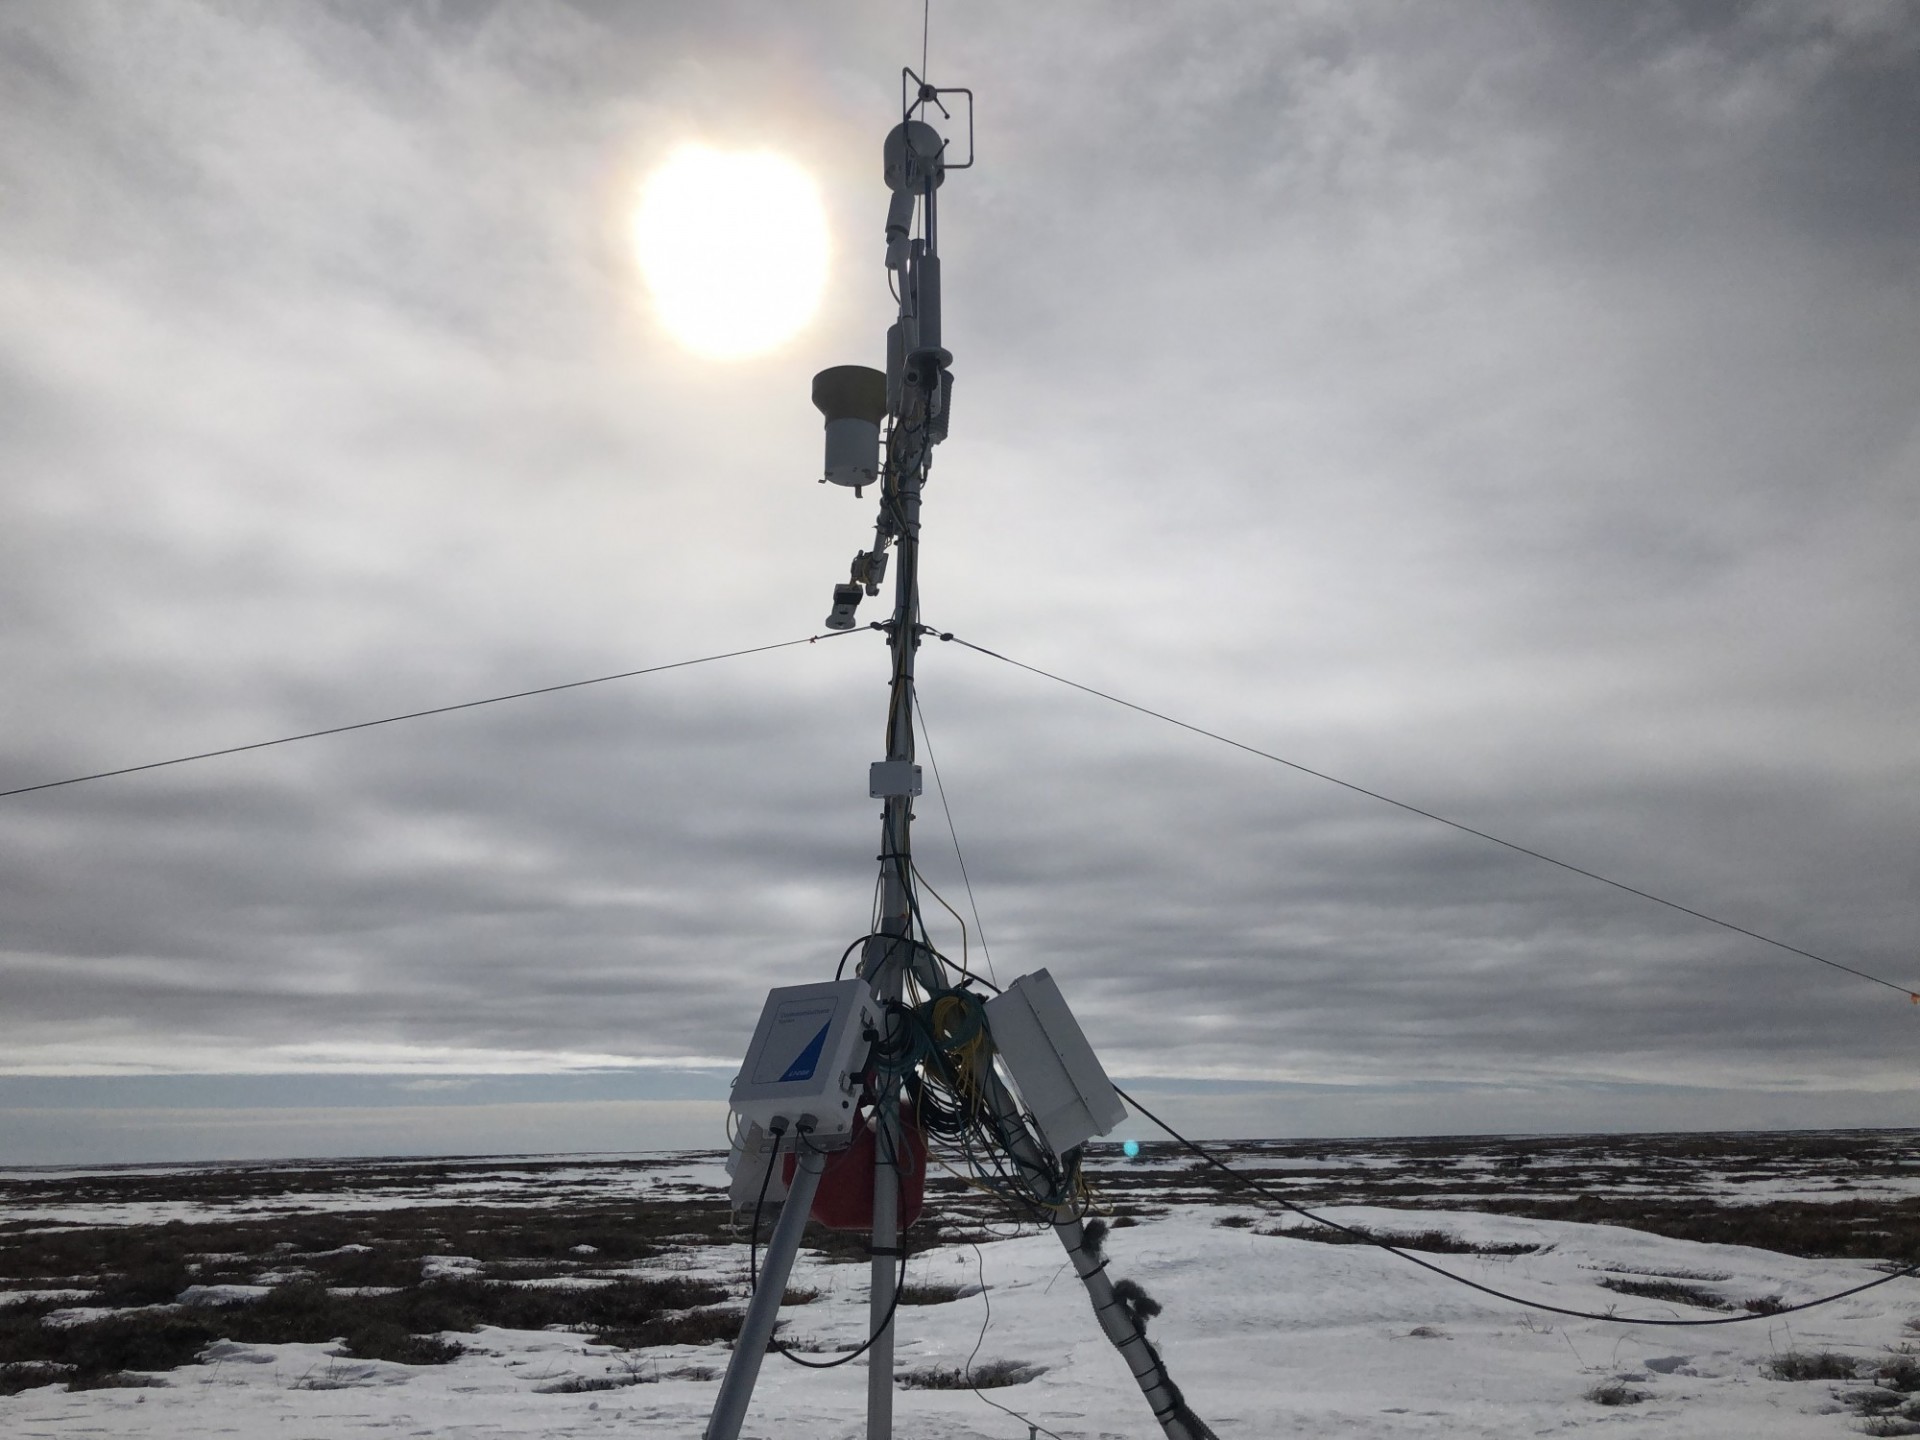 photo of eddy covariance flux tower in snowy landscape, sun through clouds in background